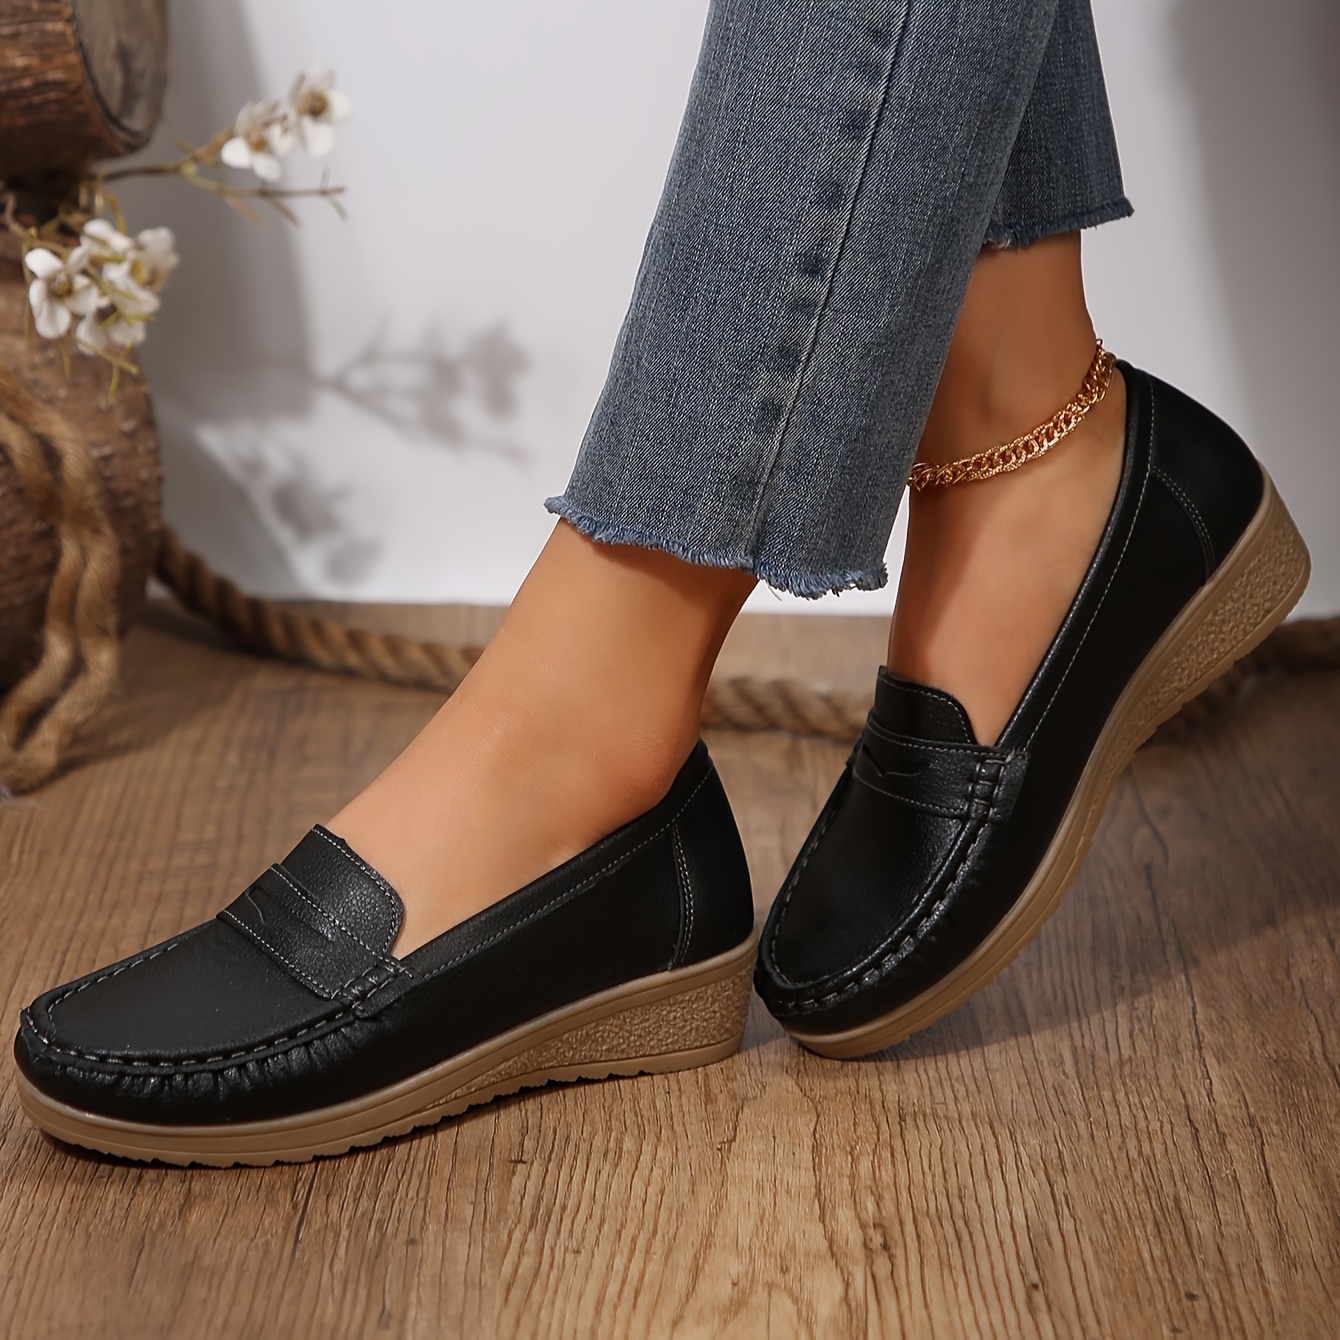 Riso Leather Loafers, Casual Shoes, Slip Ons, Handmade Shoes, Women Flat  Shoes, Black Loafers, Pointy Toe Loafers, Brown Women Loafers 